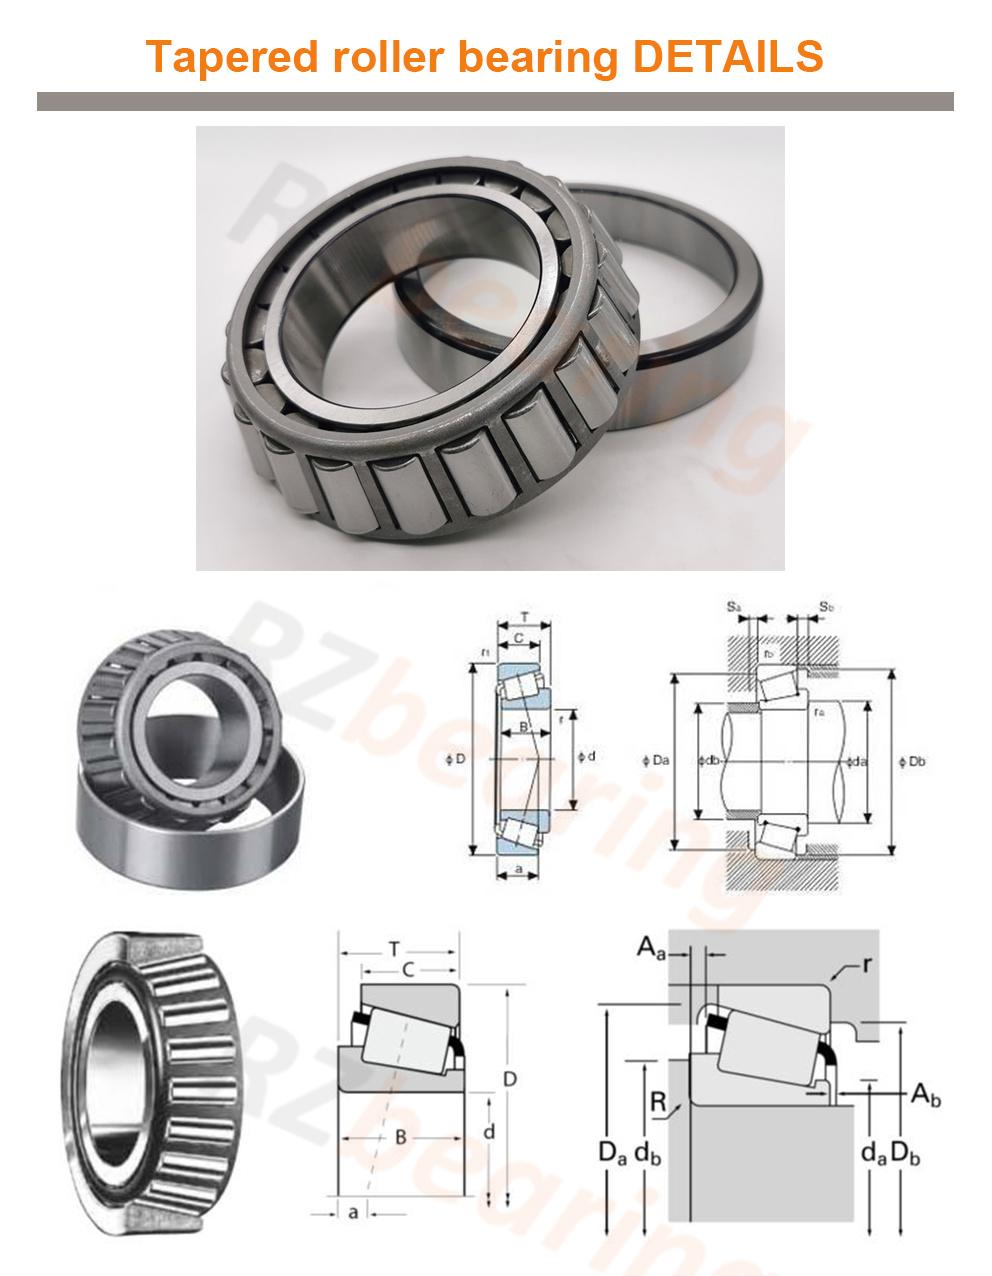 Bearing Deep Groove Ball Bearing Auto Parts Tapered Roller Bearing 32307 35*80*31 with High Precision